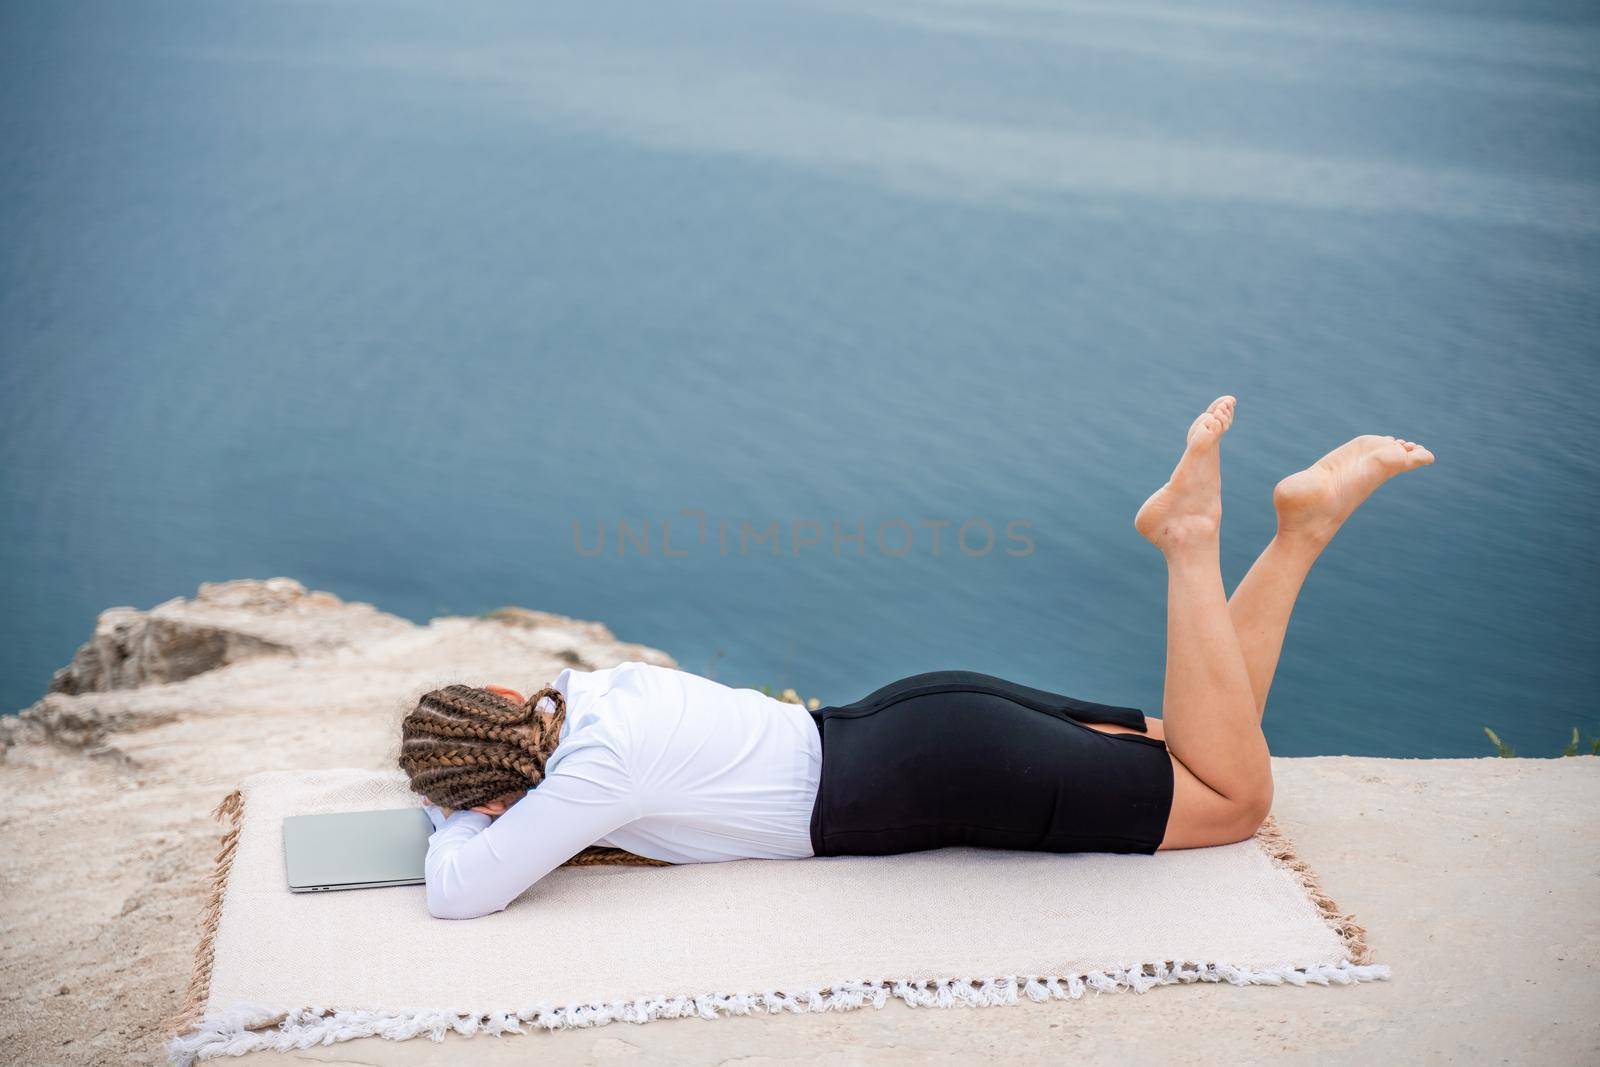 A woman is lying and typing on a laptop keyboard on a terrace with a beautiful sea view. Wearing a white blouse and black skirt. Freelance travel and vacation concept, digital nomad